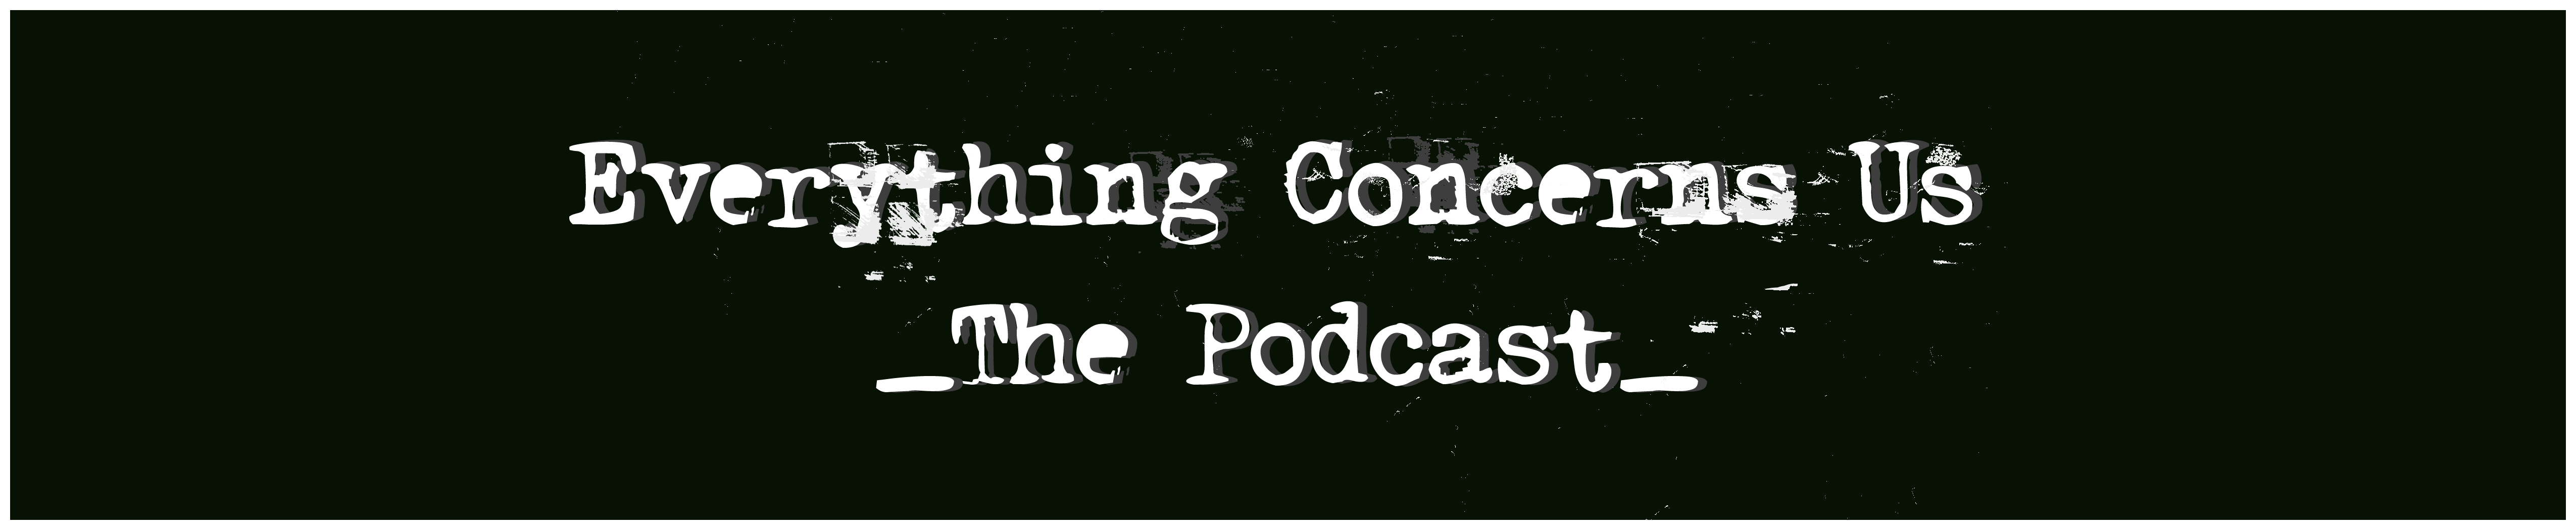 Everything Concerns Us Podcast